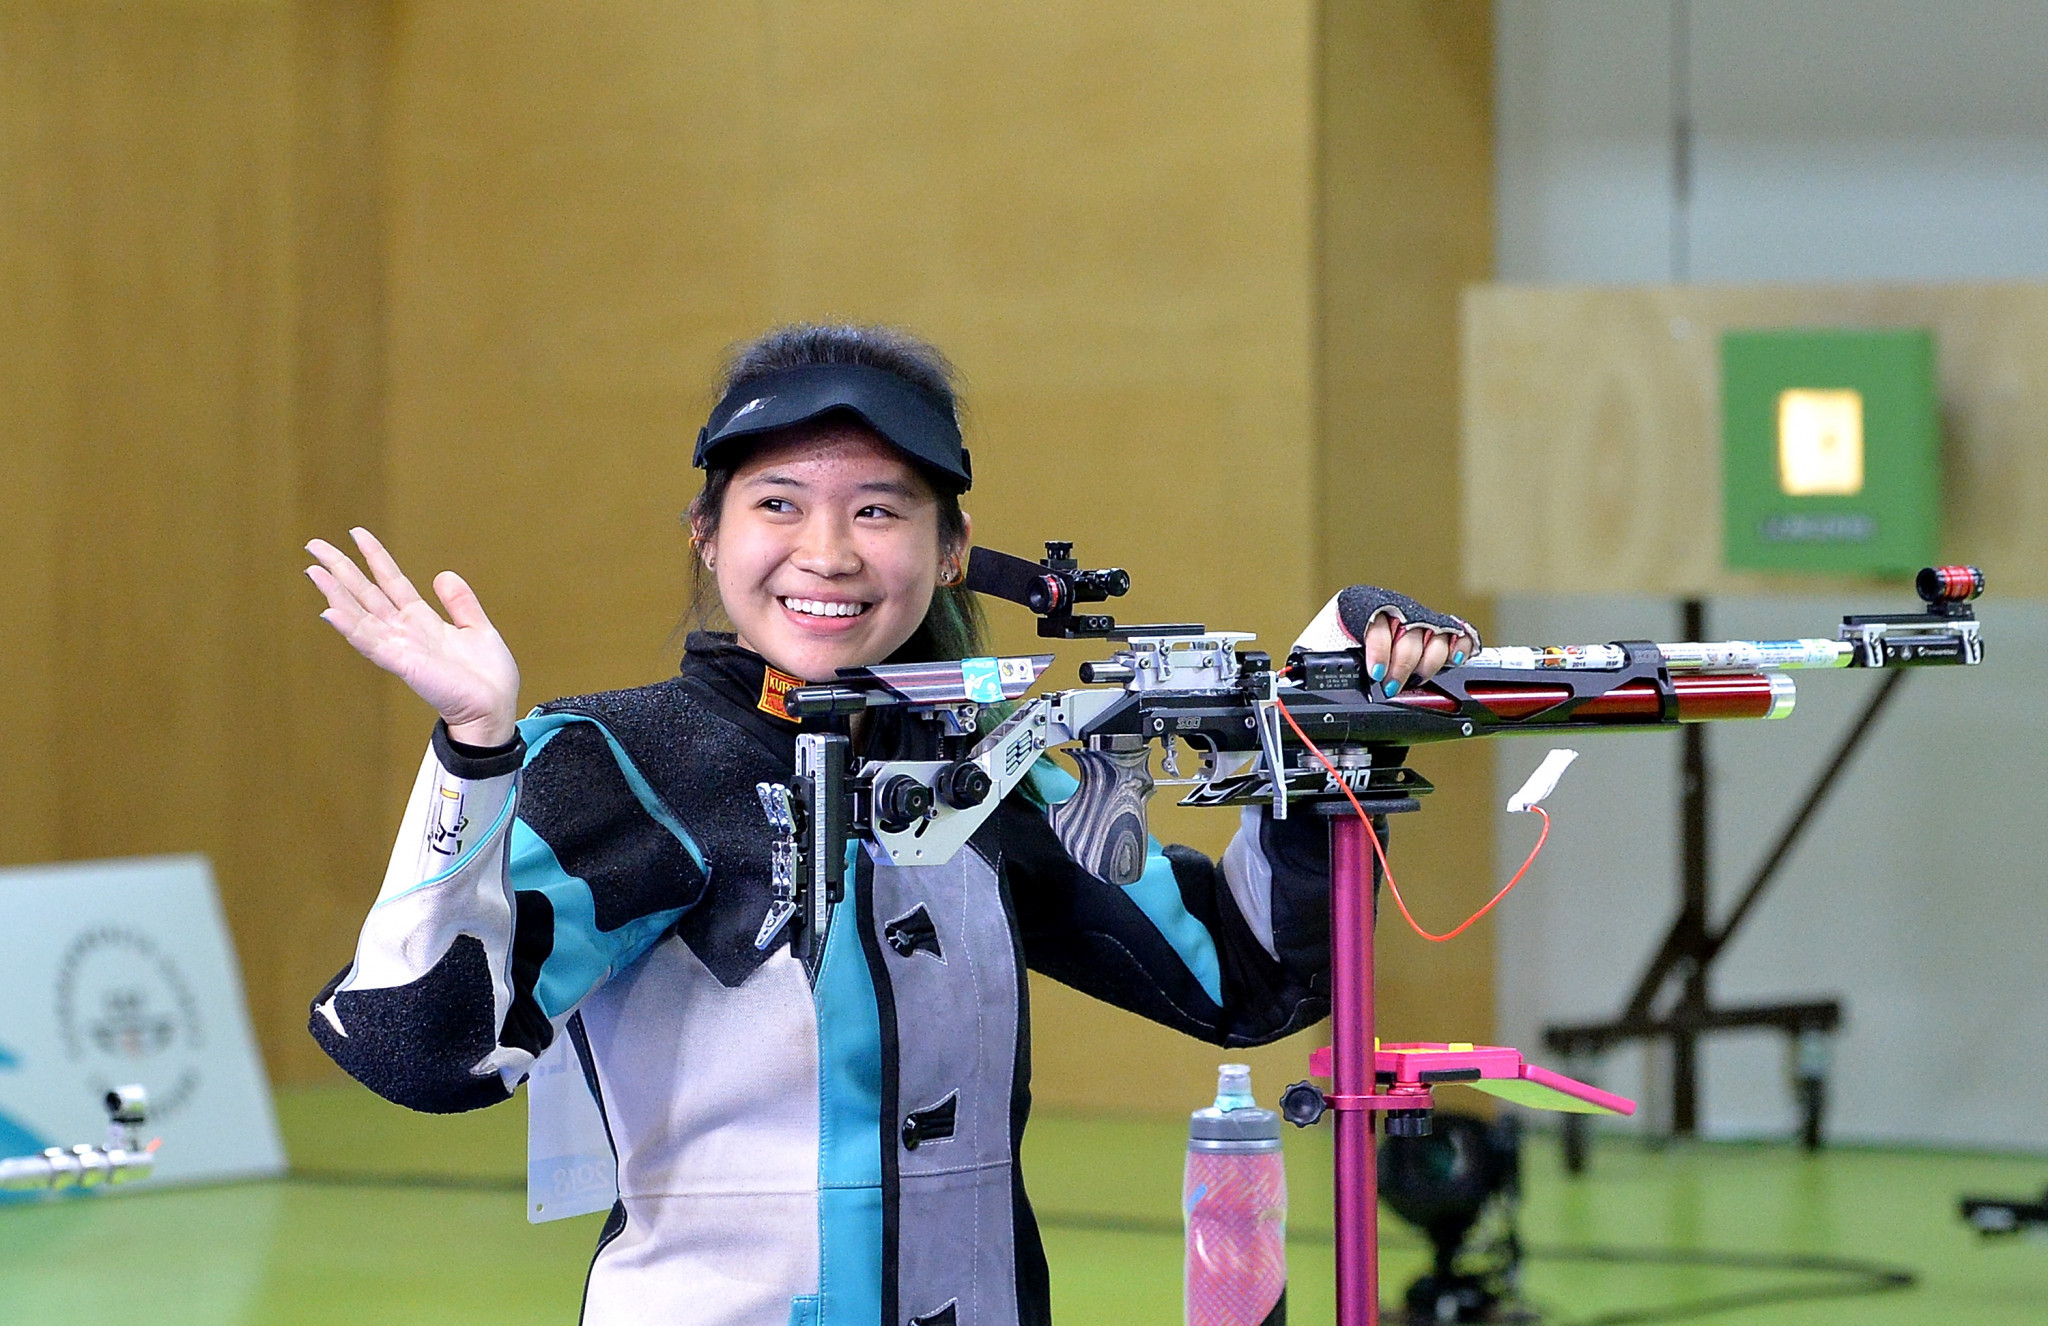 Martina Veloso won a shoot-off in the women's 10m air rifle event ©Getty Images